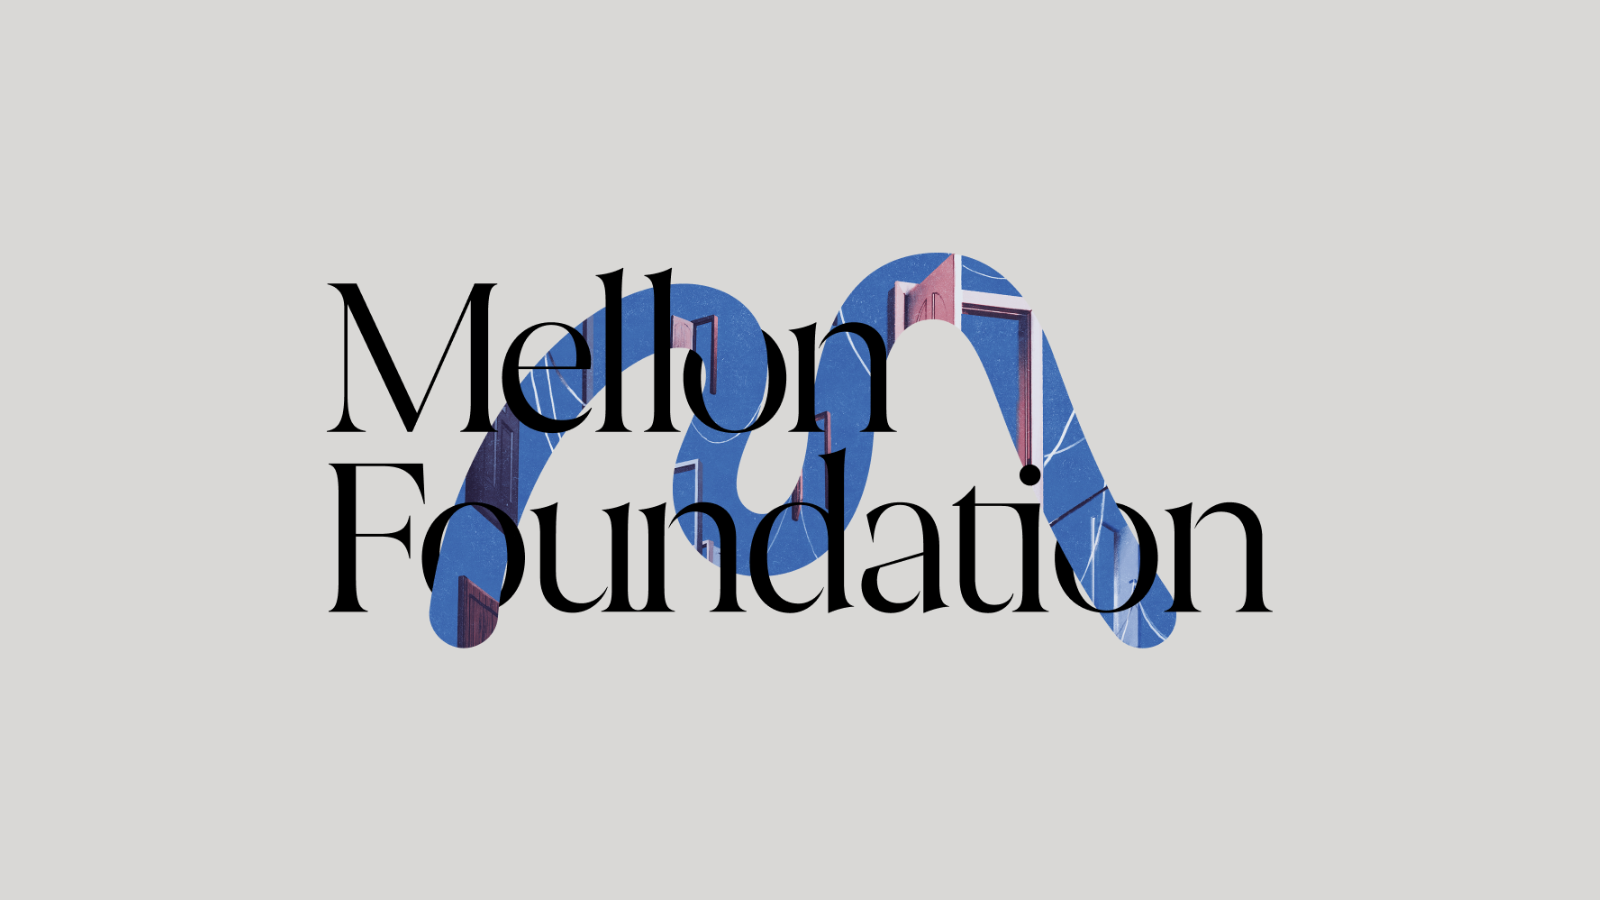 Decorative image of letter M passing through the Mellon Foundation